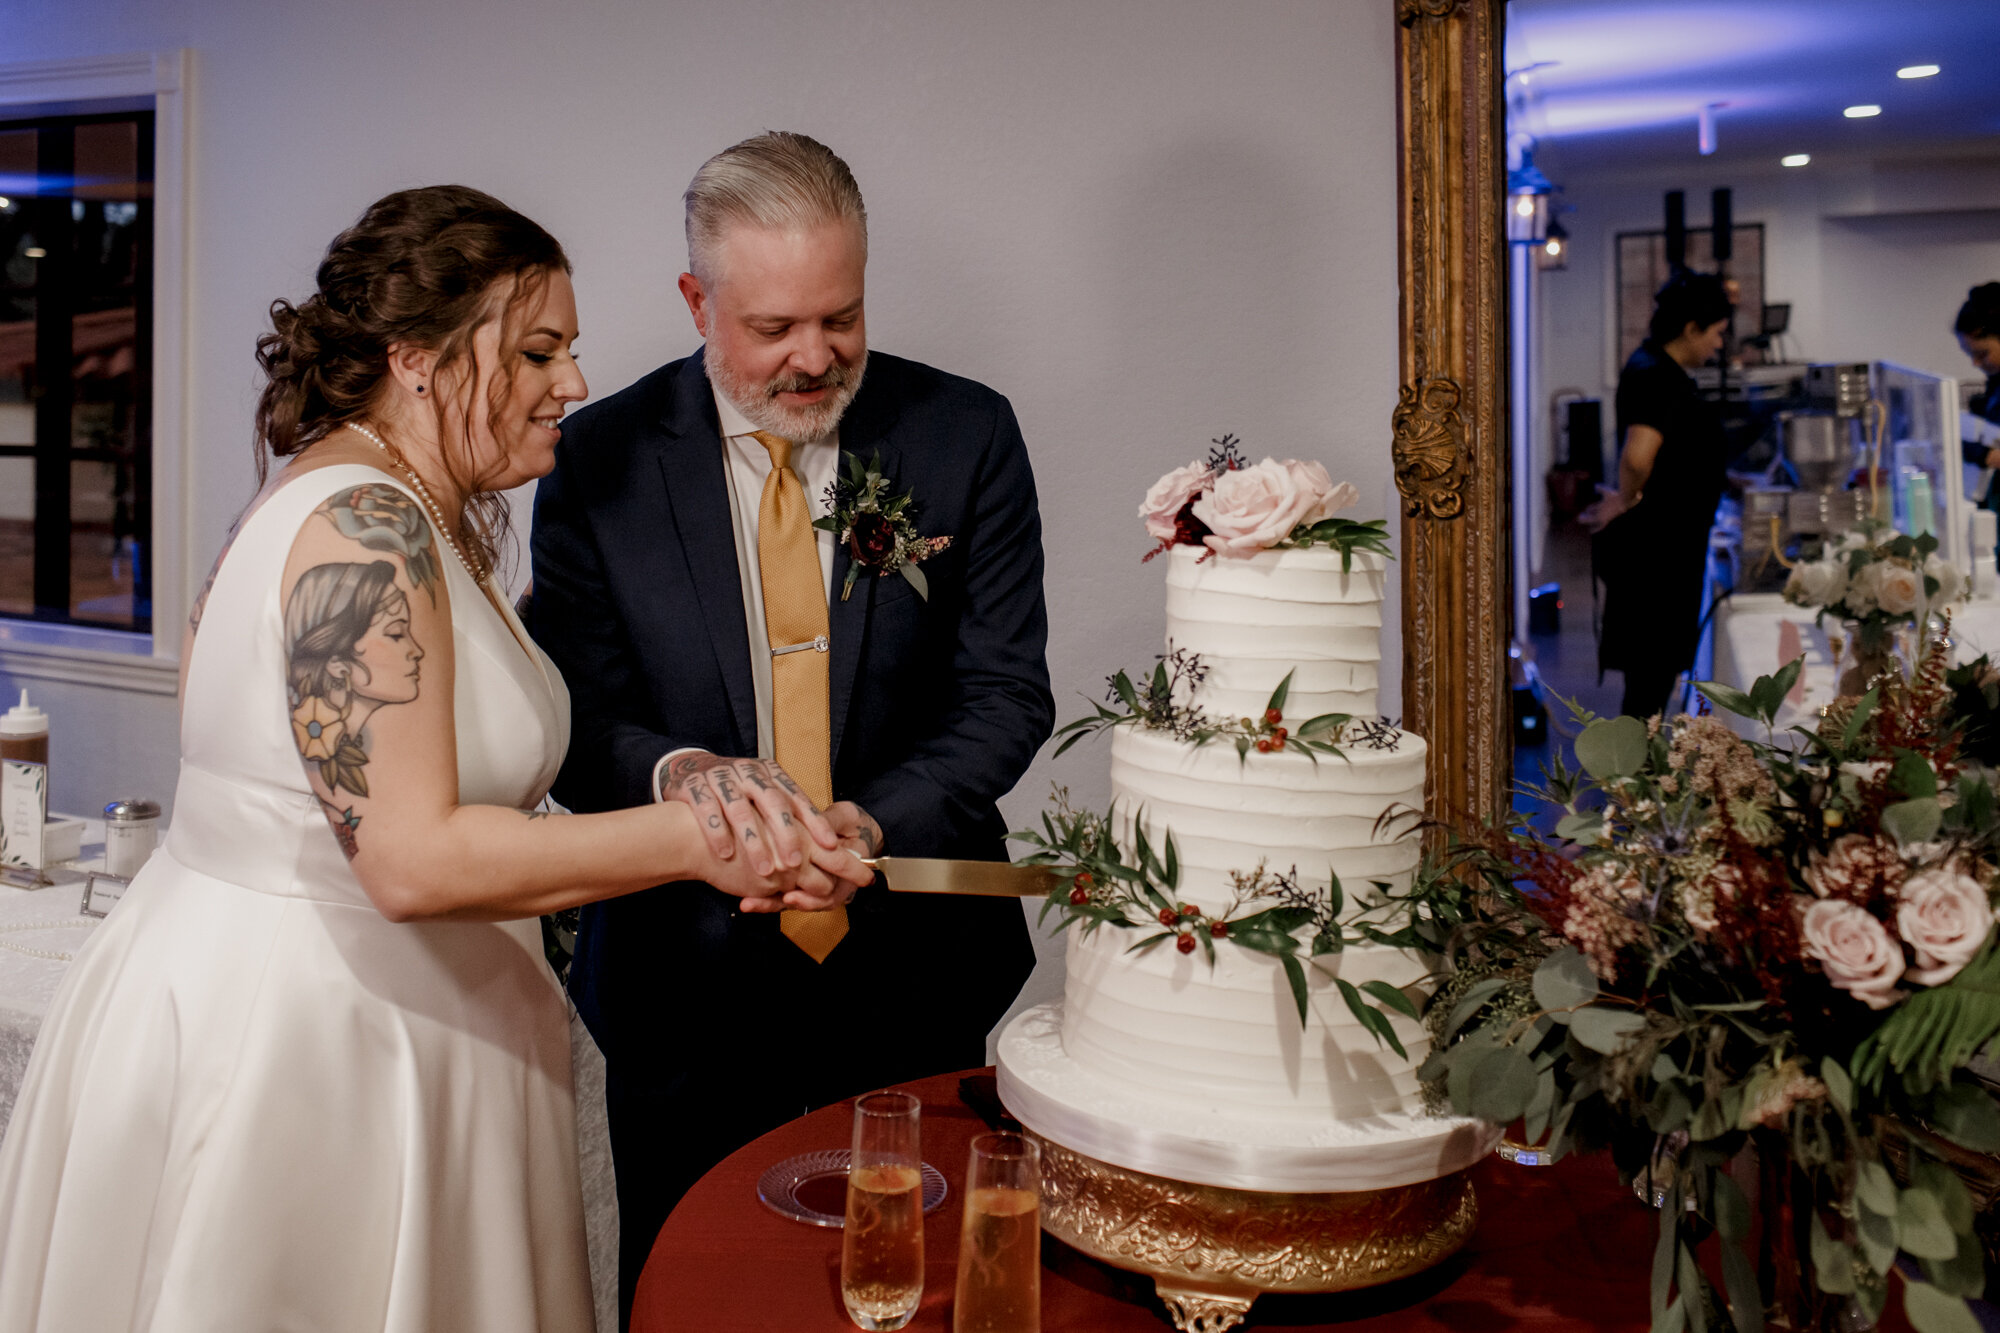 Bride and groom cutting the cake. Rock Star Wedding at The Gallery